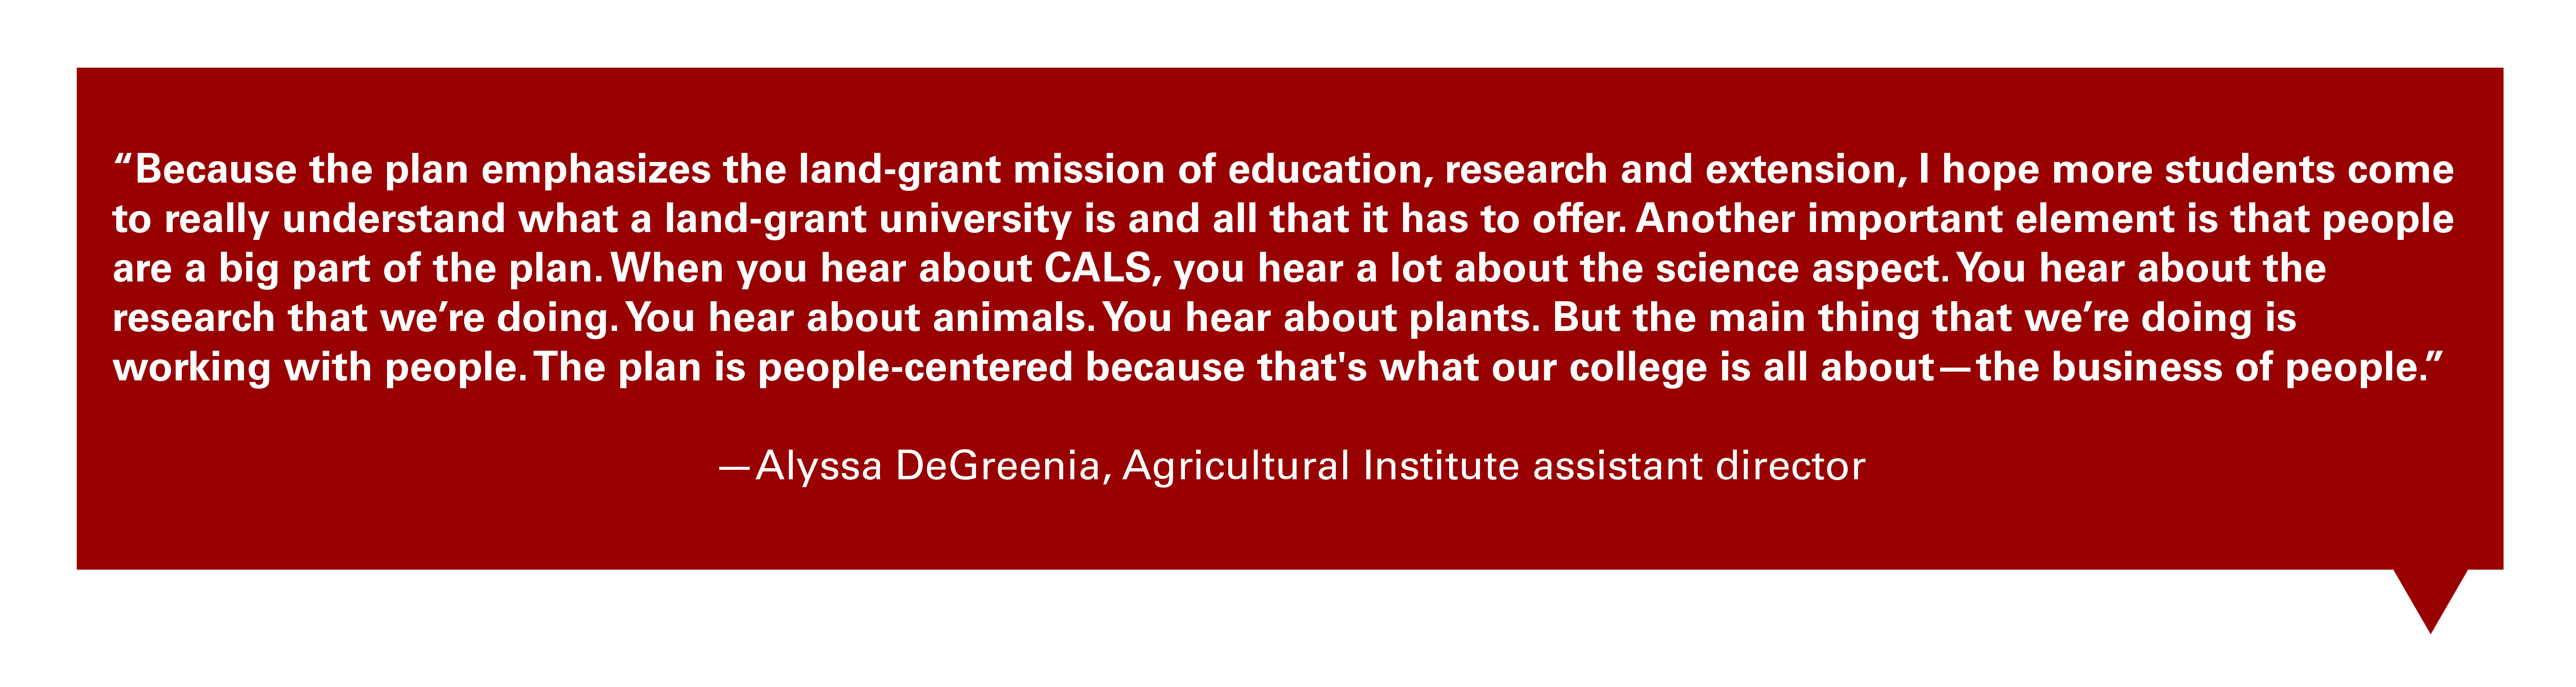 Quote from Alyssa DeGreenia, the Agricultural Institute assistant director: "Because the plan emphasizes the land-grant mission of education, research and extension, I hope more students come to really understand what a land-grant university is and all that it has to offer. Another important element is that people are a big part of the plan. When you hear about CALS, you hear a lot about the science aspect. You hear about the research that we’re doing. You hear about animals. You hear about plants. But the main thing that we’re doing is working with people. The plan is people-centered because that's what our college is all about—the business of people."